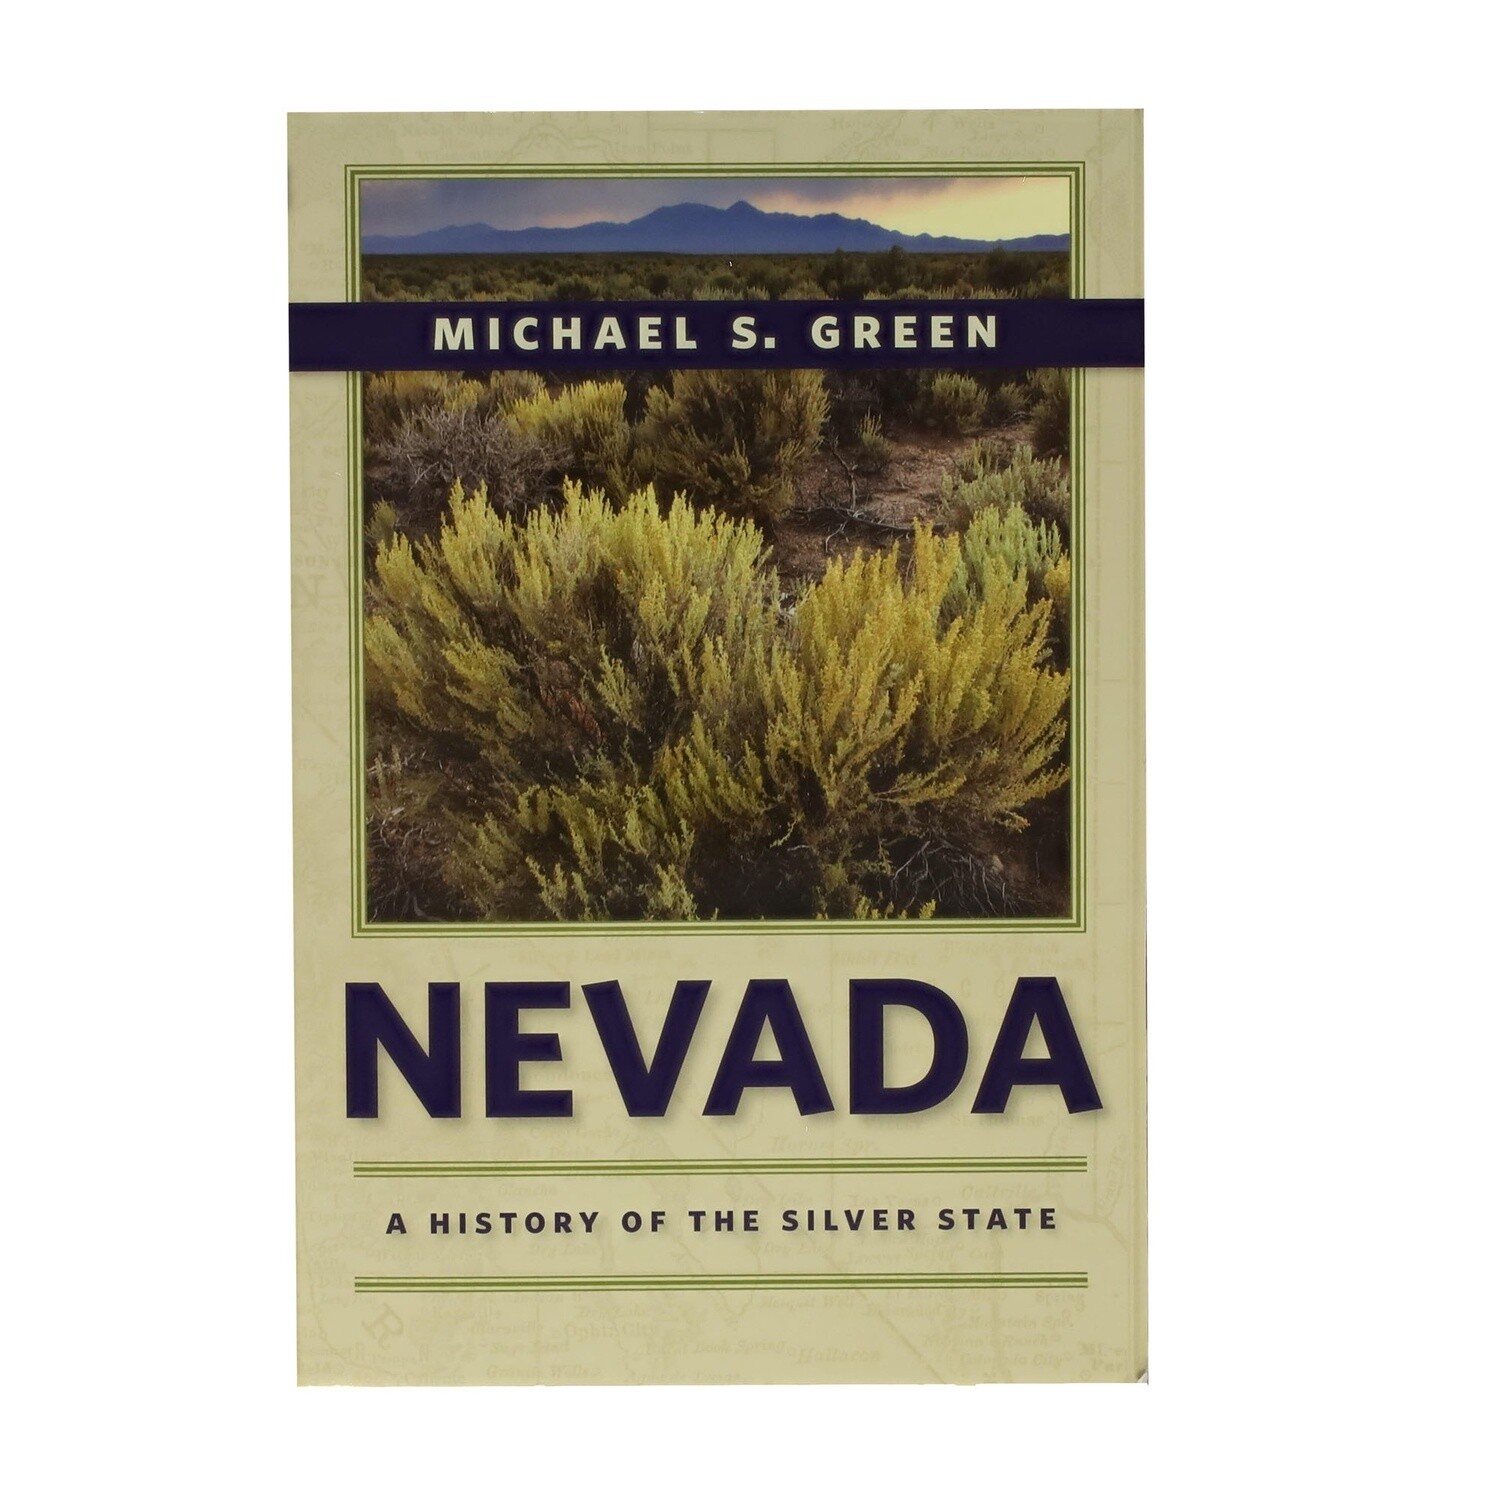 Nevada - A History of the Silver State, by Michael S. Green